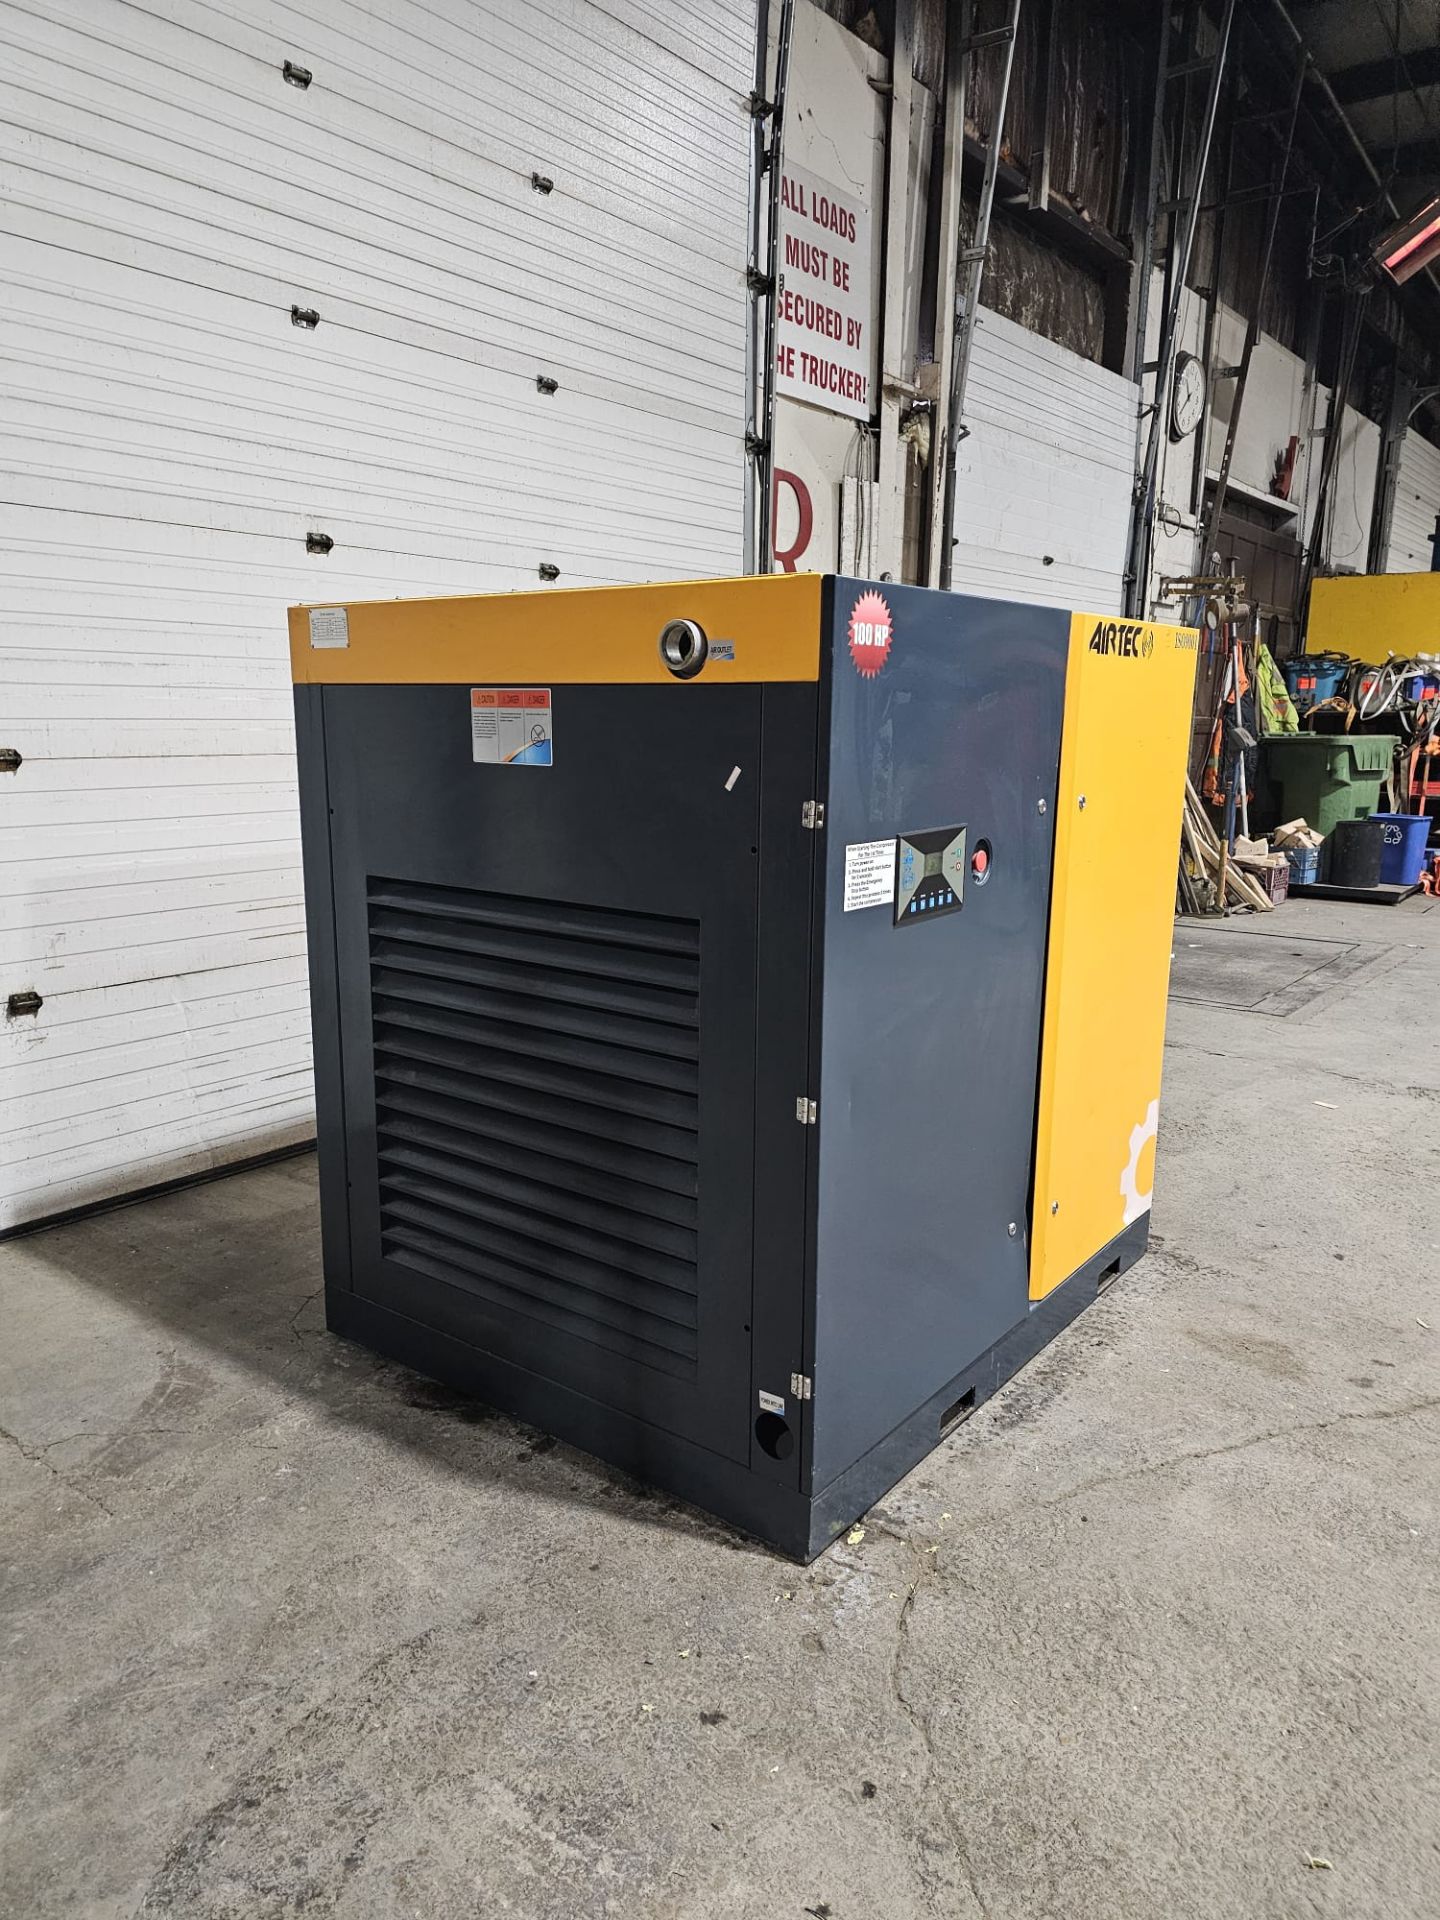 Airtec 100HP Rotary Screw Air Compressor - Electrical Issues with this compressor - Image 2 of 5